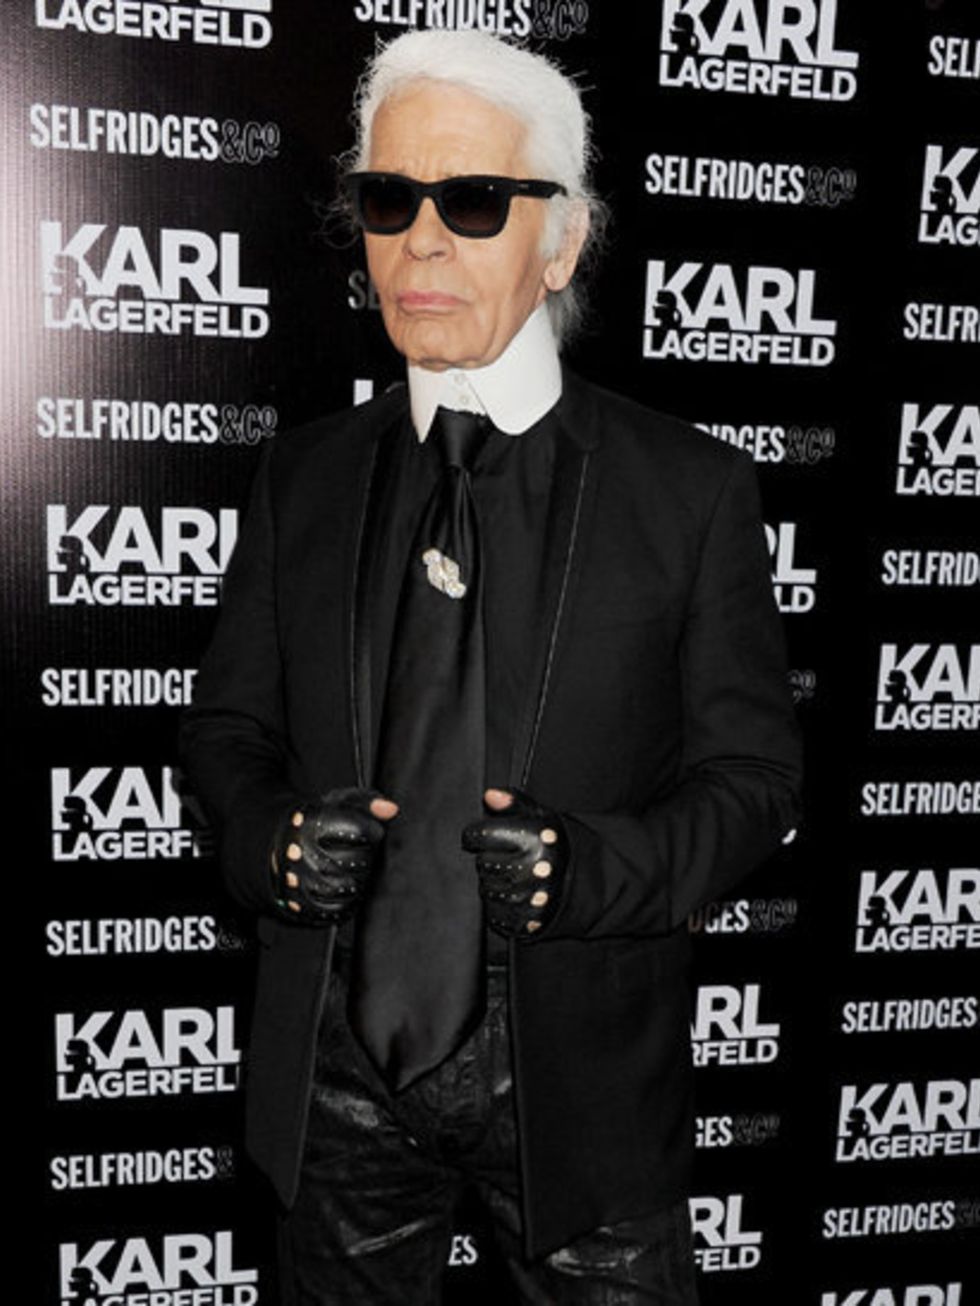 <p>Karl Lagerfeld at his Selfridges launch party</p>